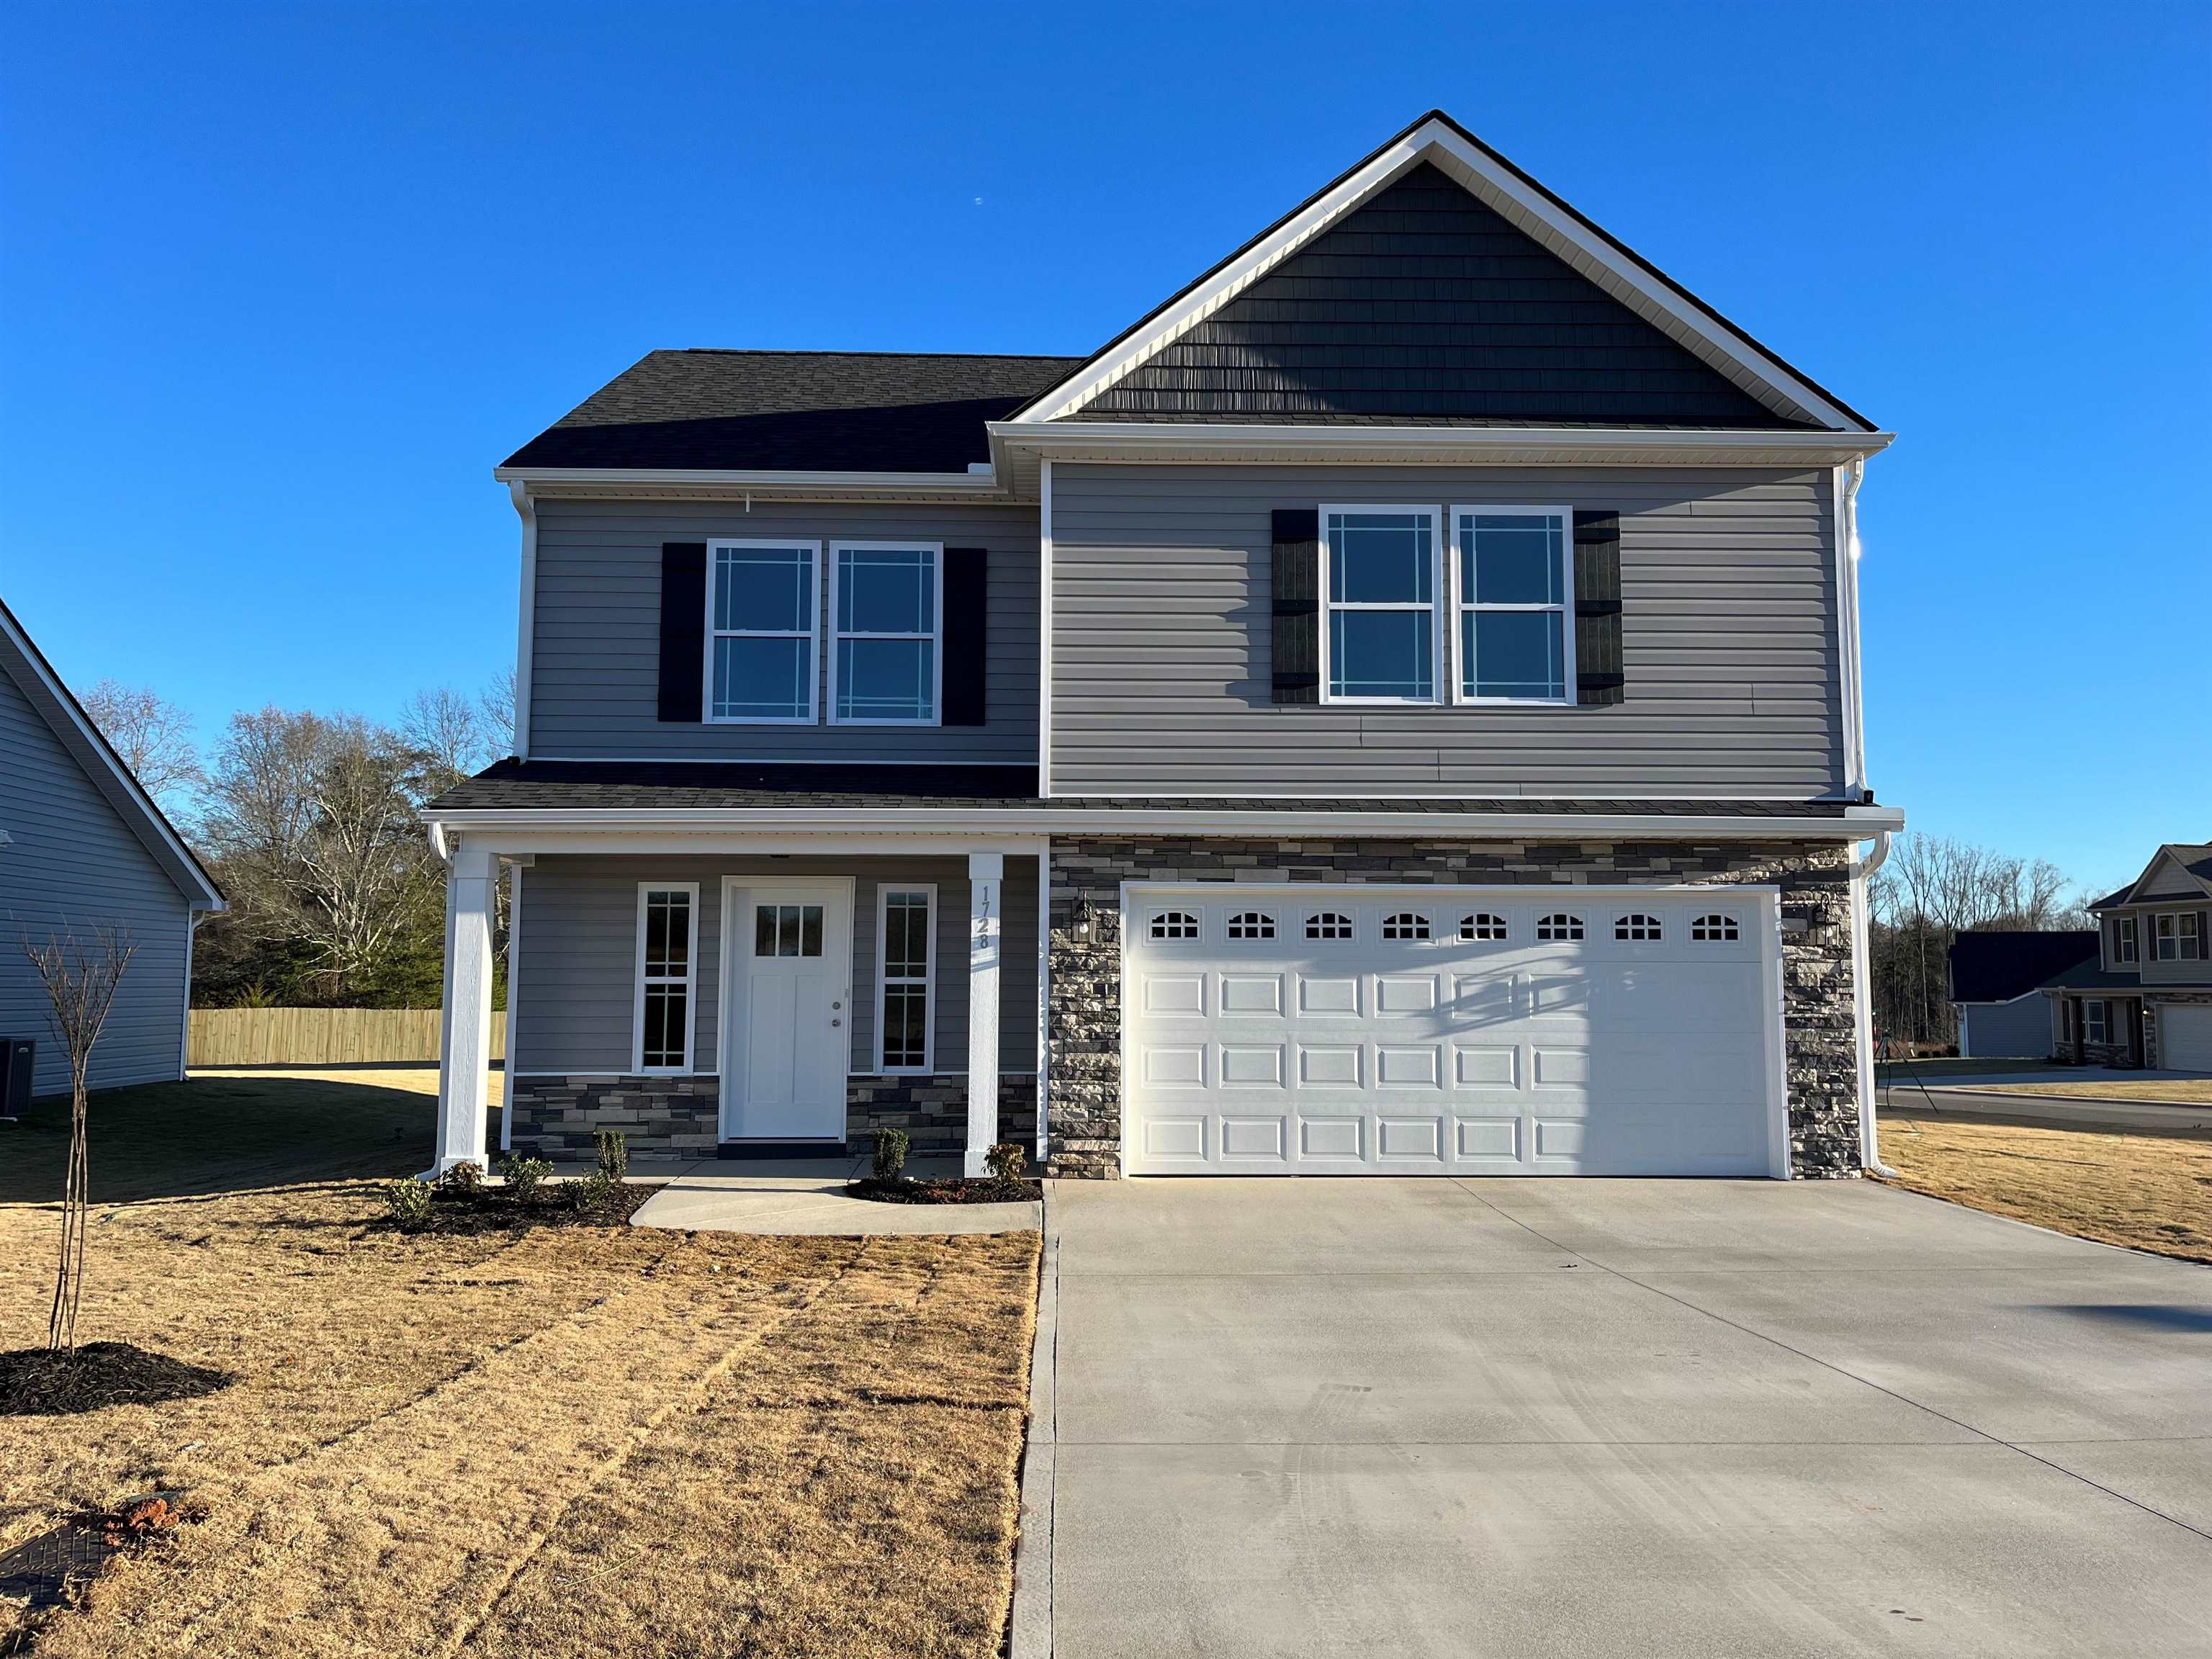 This is the HEATHERWOOD, a 4 bedroom, 2 1/2 bath home with walk in laundry, gas fireplace, upgraded flooring in living room, granite countertops, and a 12x12 back patio. Located in the NEW Elliott Park community in Lyman just minutes from Spartanburg and Greenville. Call today for more info!